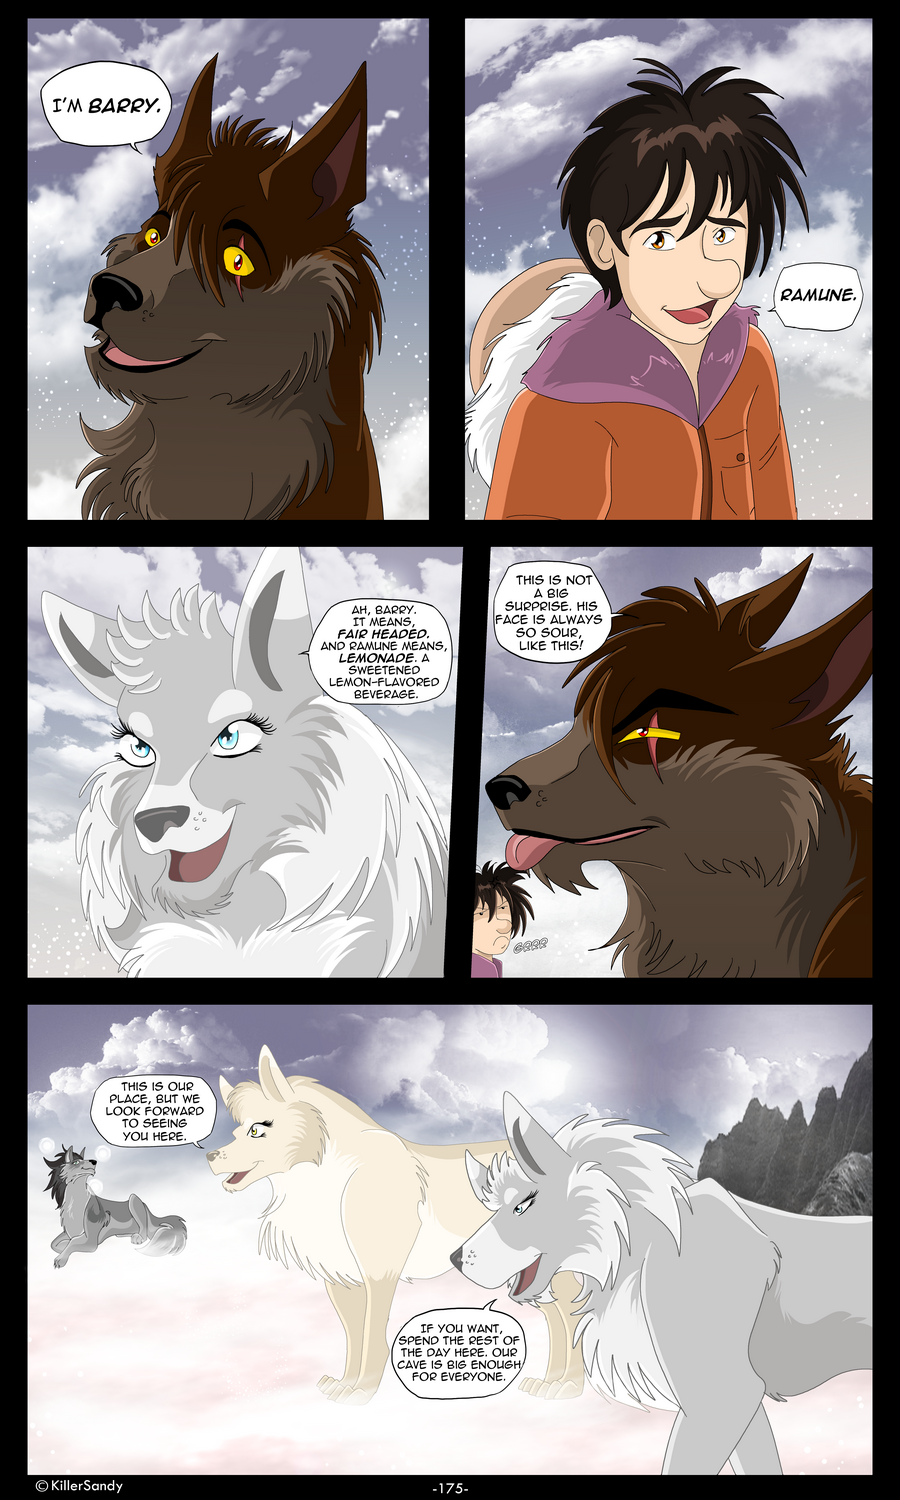 The Prince of the Moonlight Stone page 175